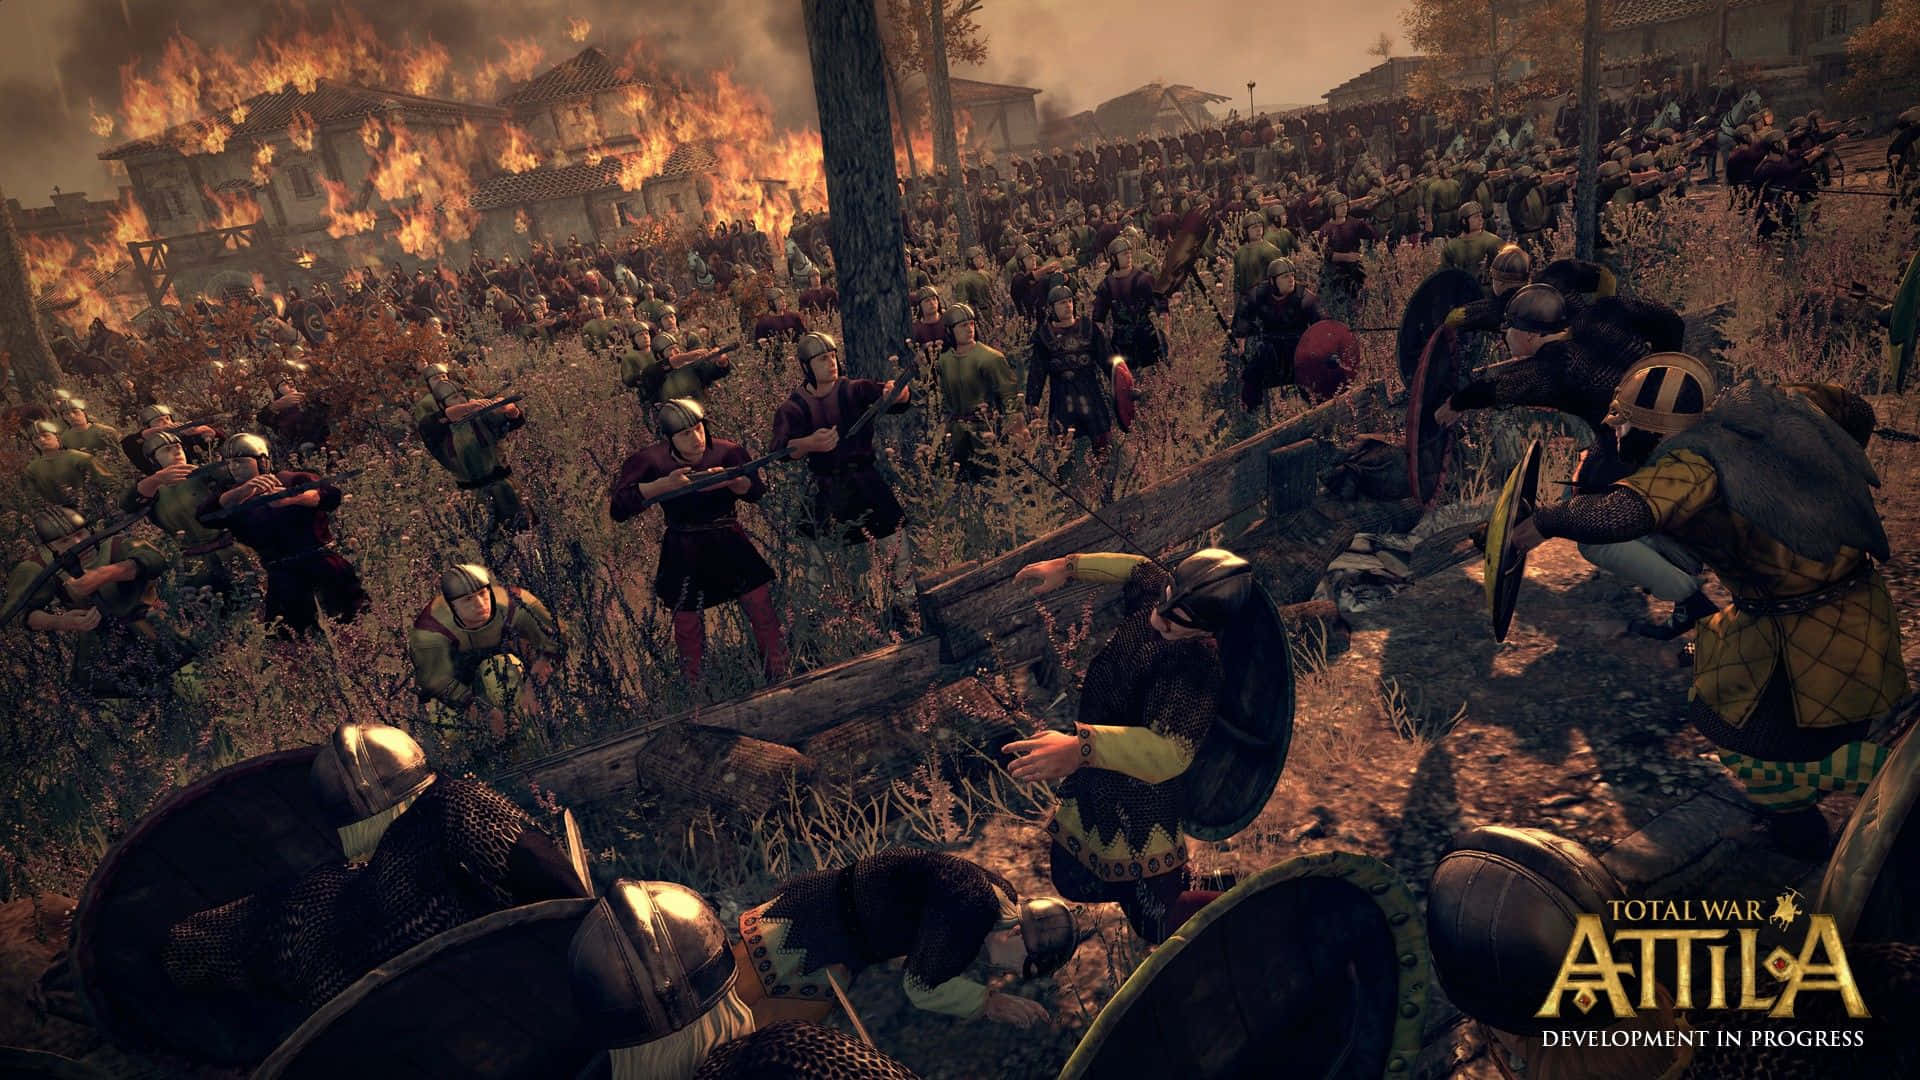 A Screenshot Of A Battle Between Romans And A Group Of Soldiers